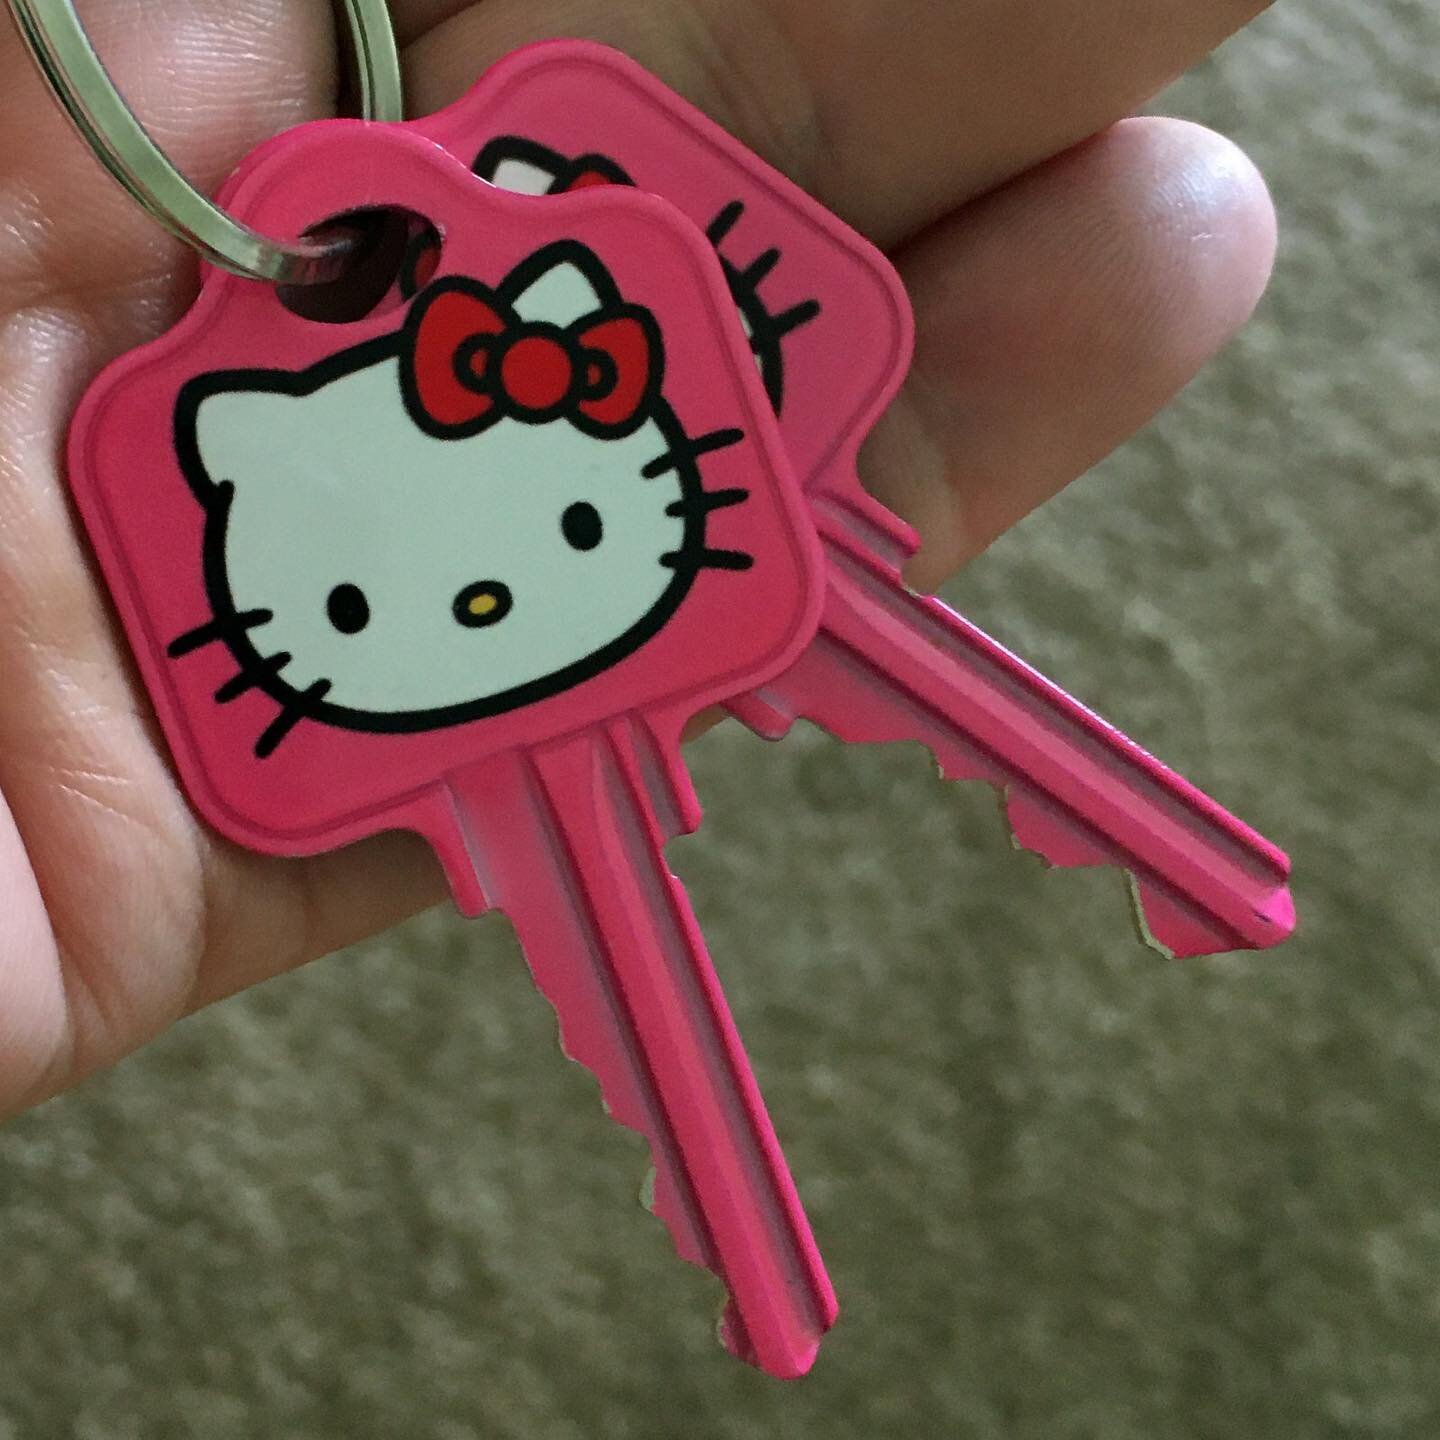 1) I&rsquo;ve moved! 2) Goodbye to the old view. 3) Hello to the new view! 4) First home cooked meal (screwdriver subbing for can opener). #hellokitty #hellonewplace #hellocurry